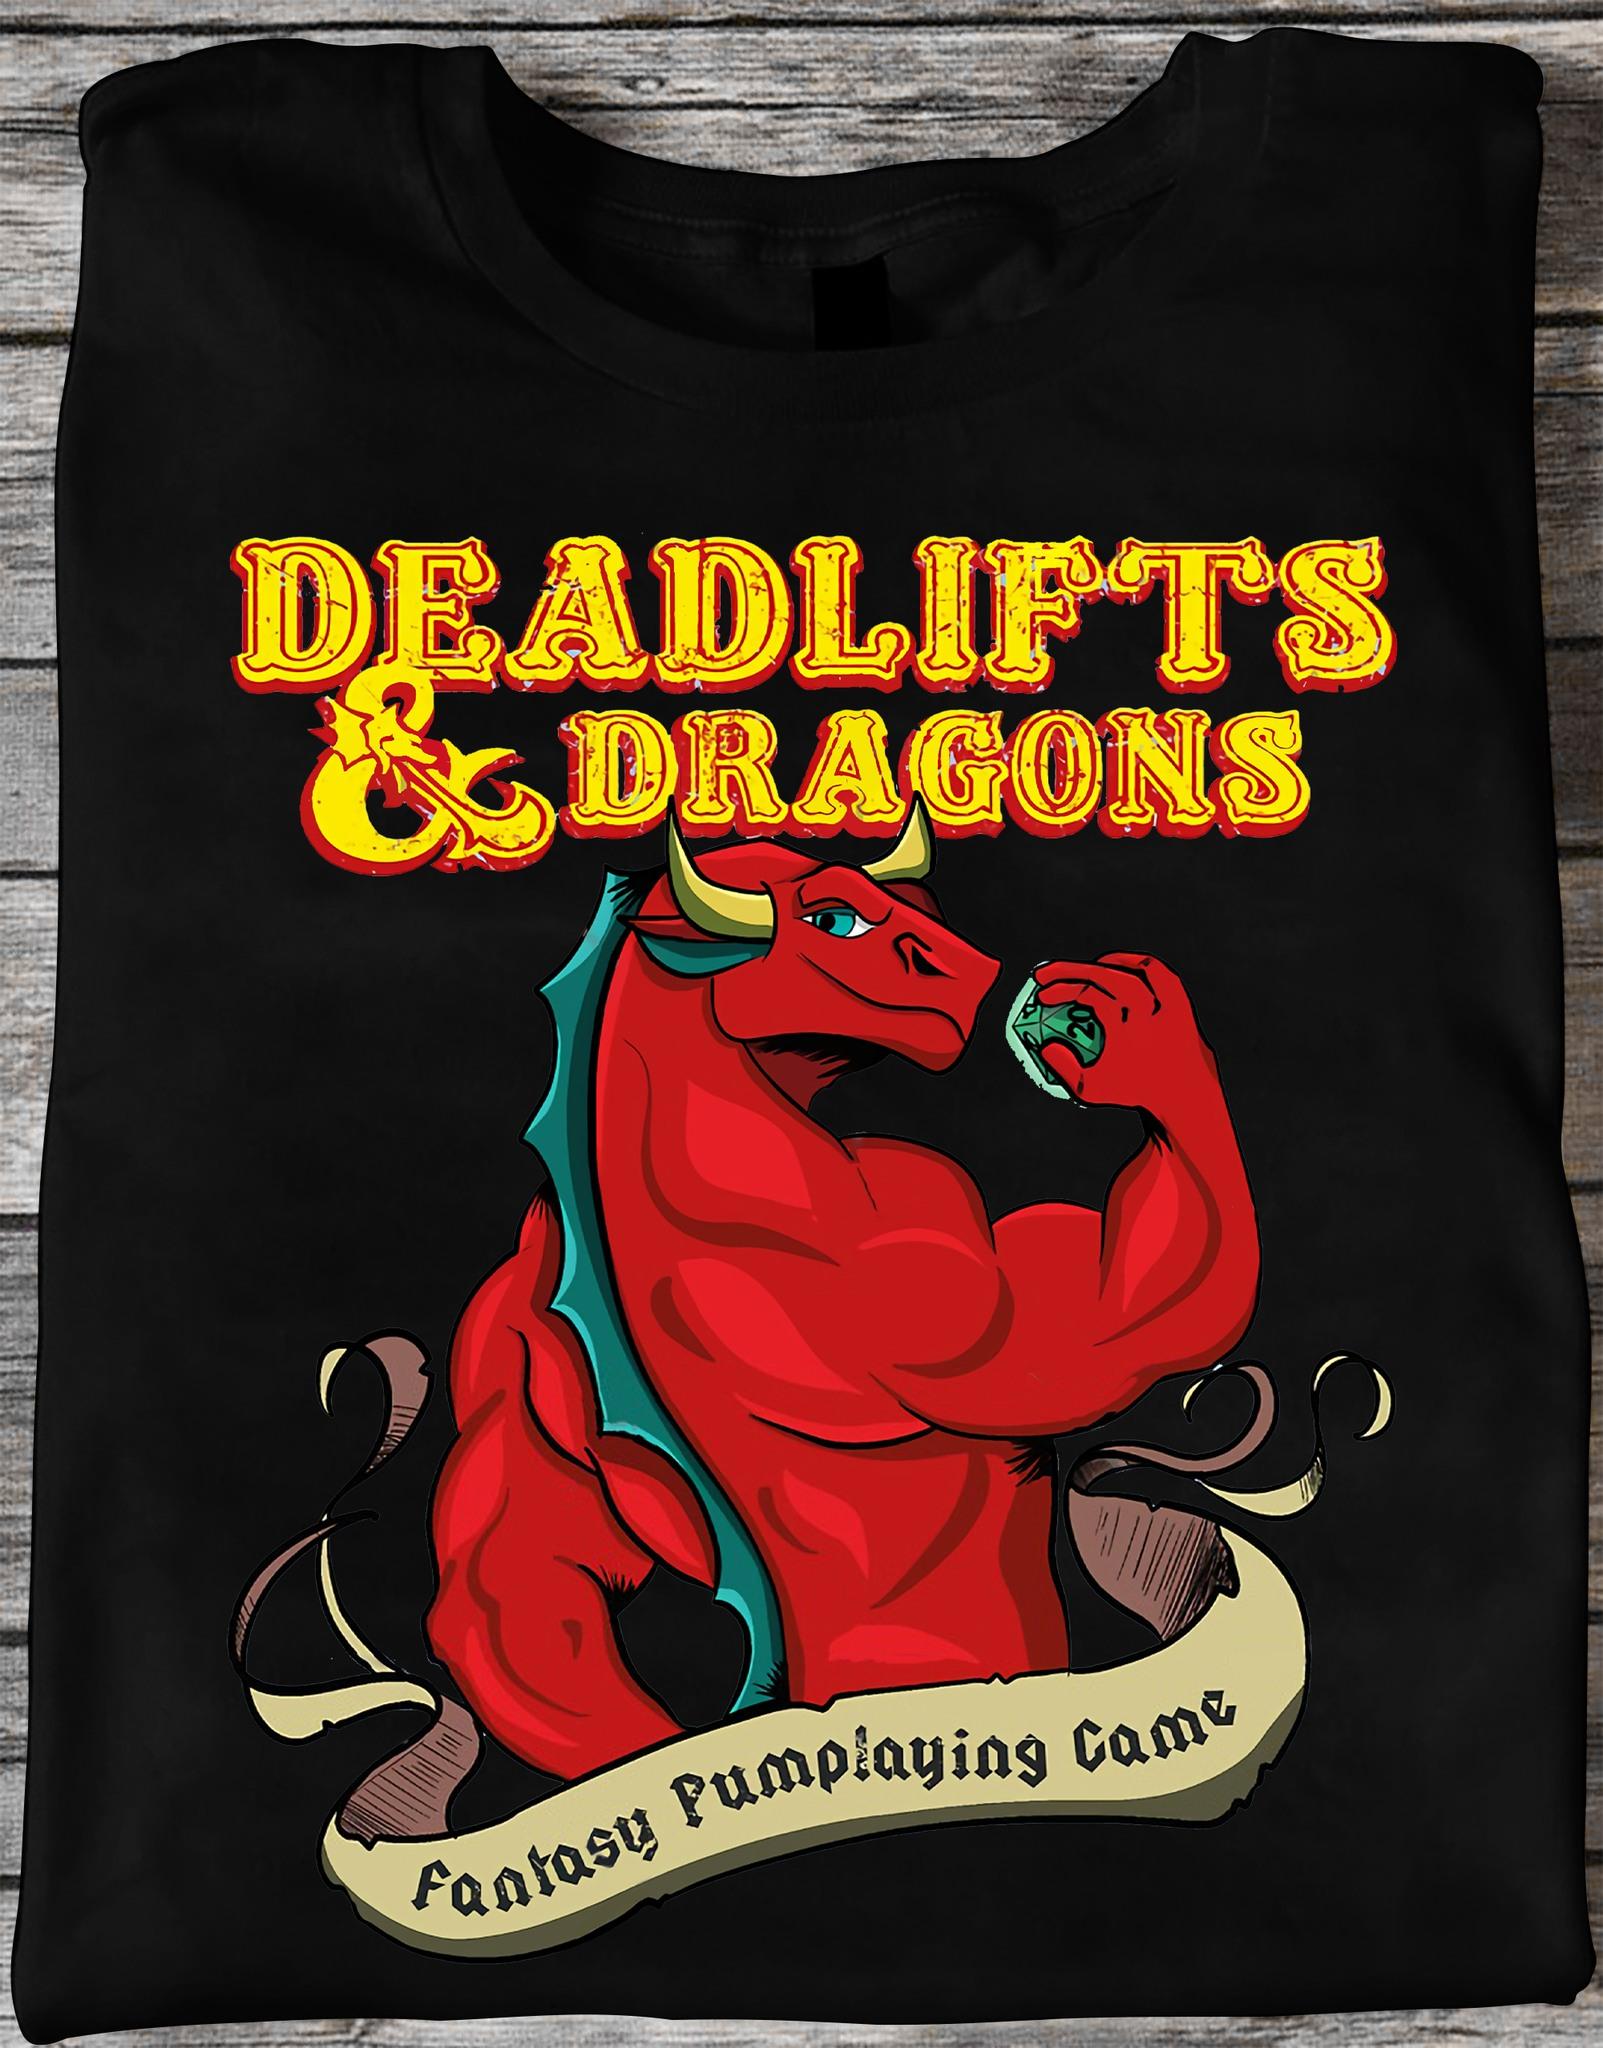 Deadlifts Dragons Dungeon And Dragon - Deadlifts and dragons fantasy pumplaying came